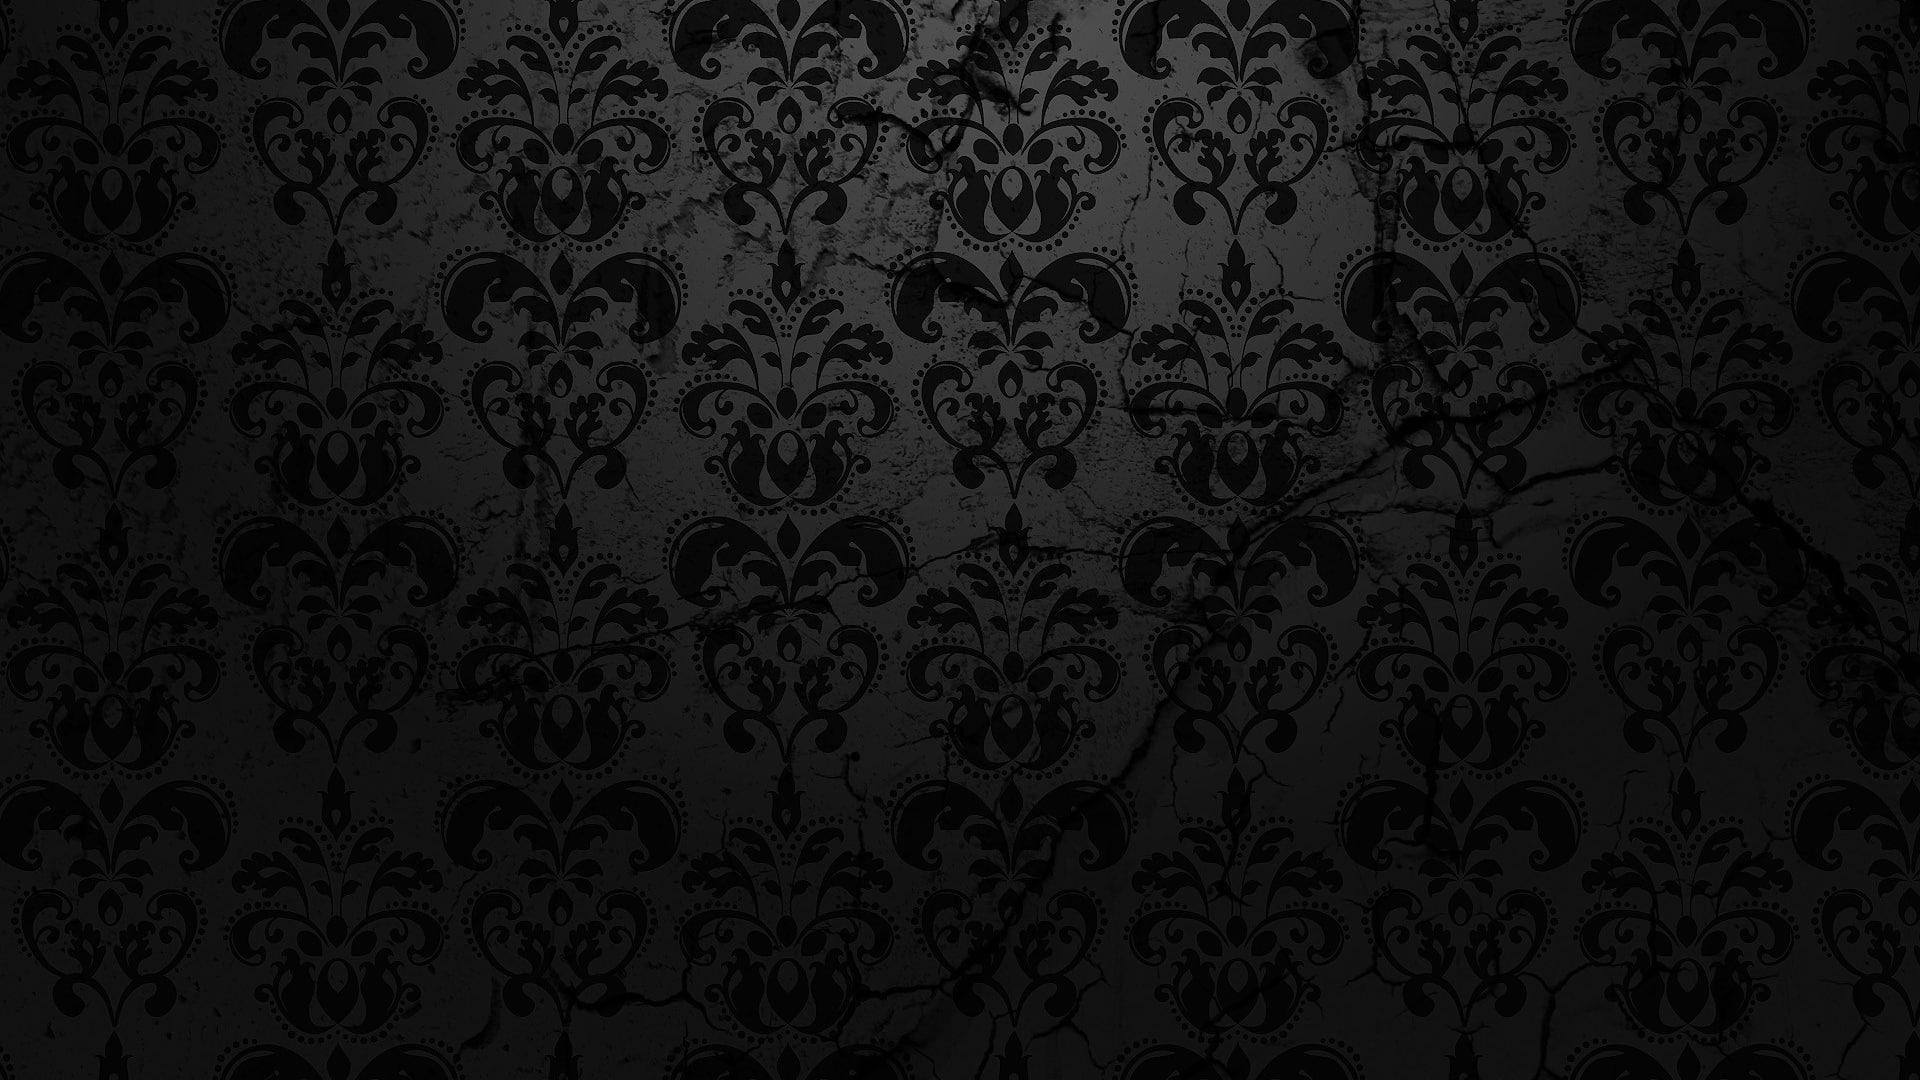 abstract, damask, pattern, seamless, floral, decorative, wallpaper